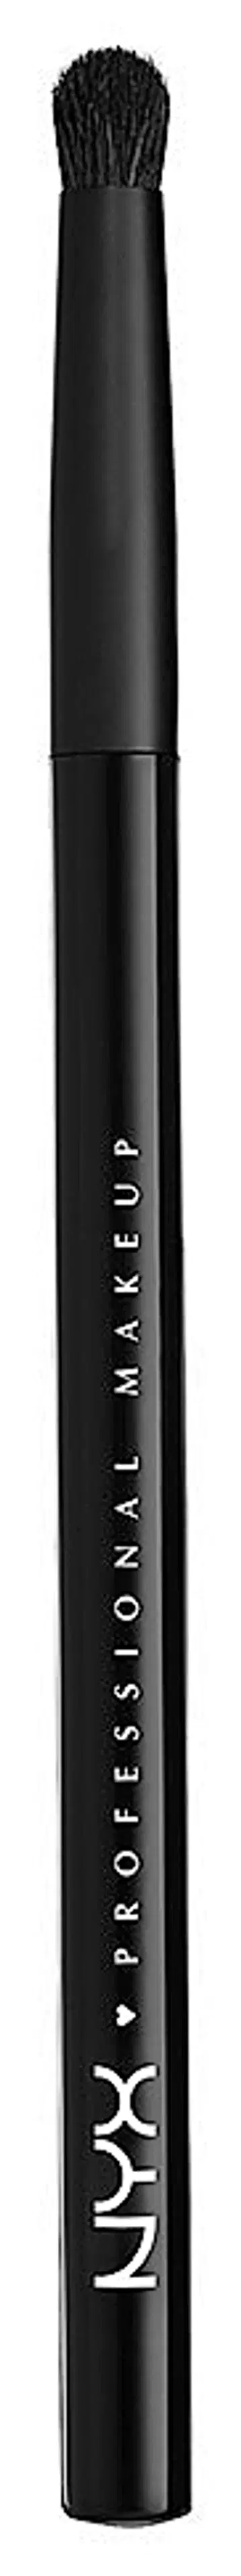 NYX Professional Makeup Pro Brush Smudging luomivärisivellin